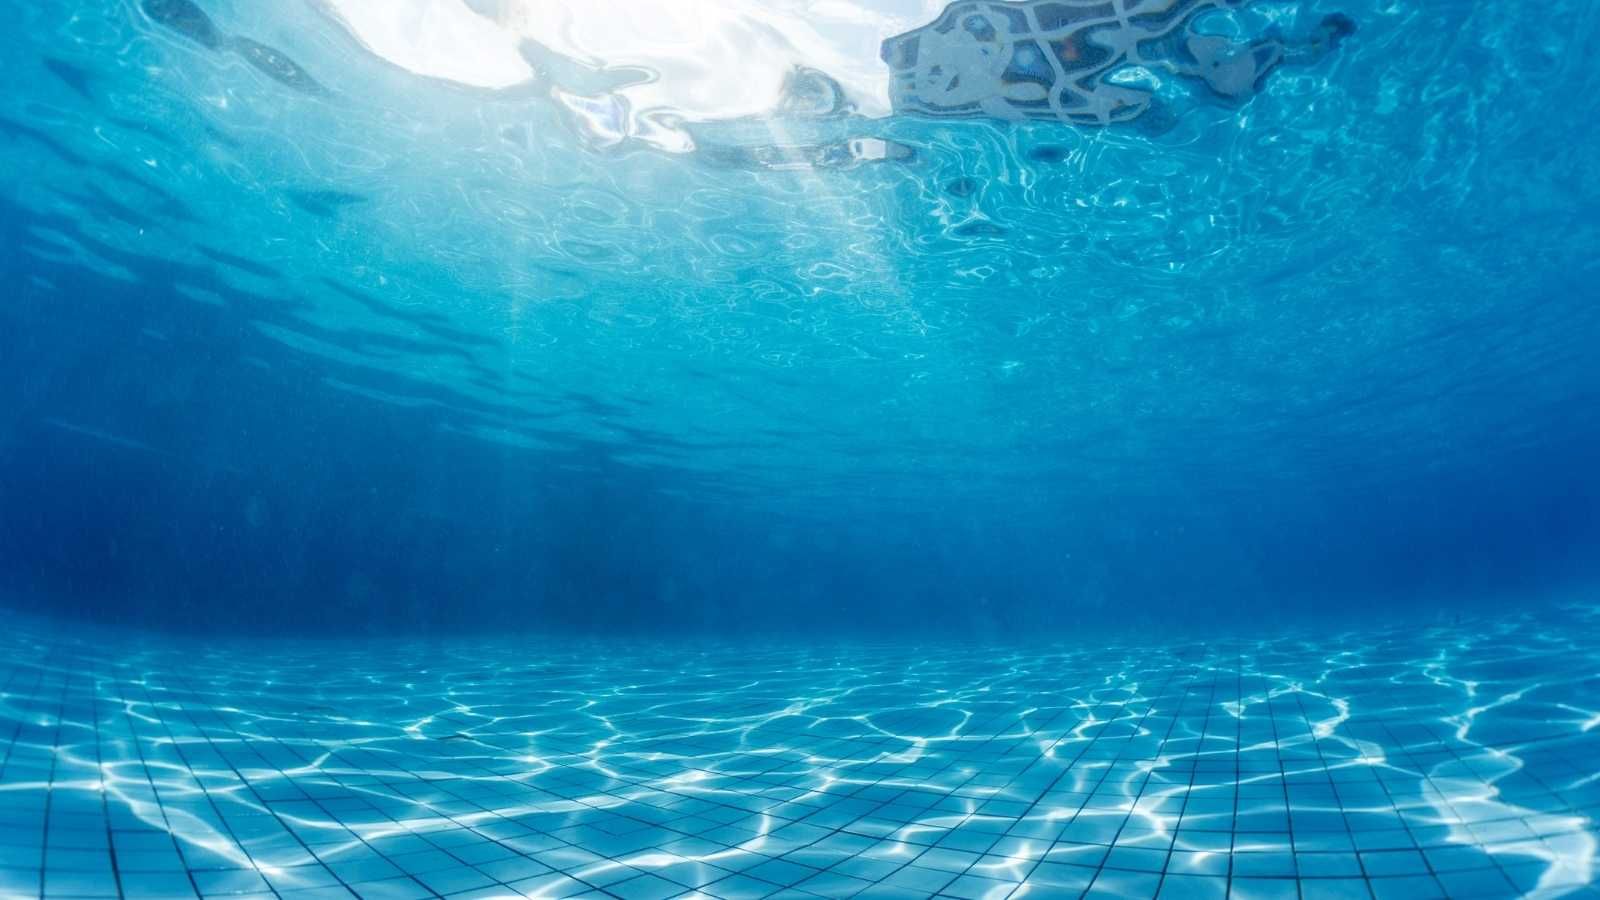 Underneath the water in a pool